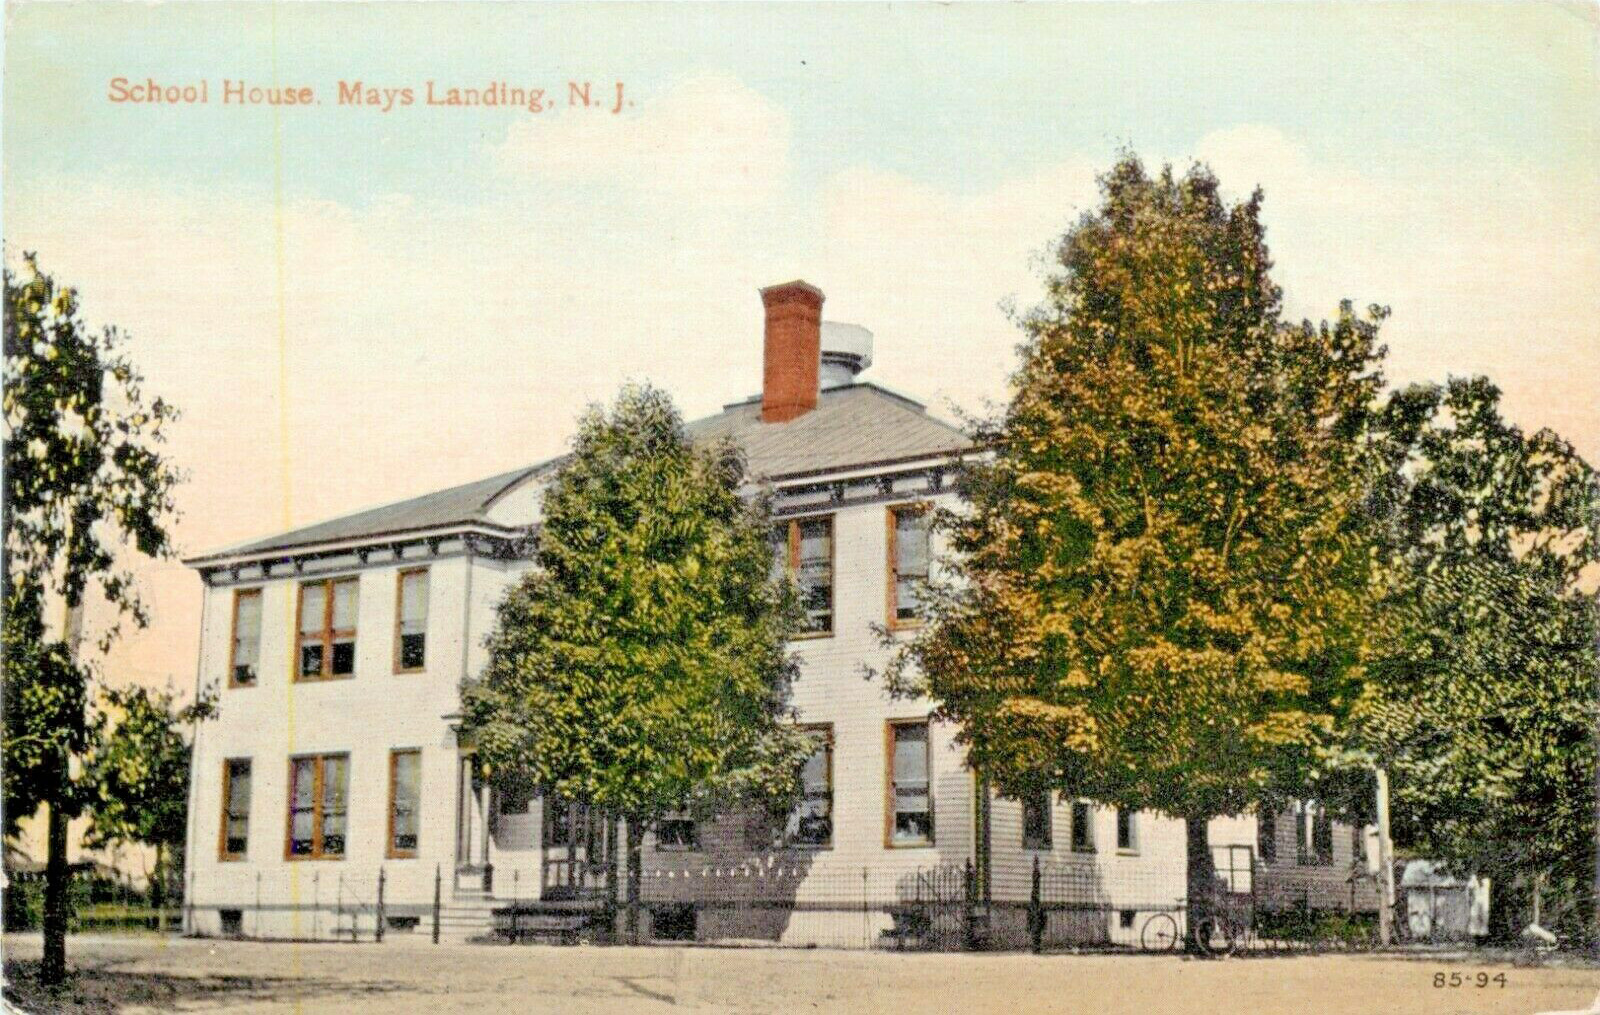 Mays Landing - A view of the Schppl Hpuse - c 1910